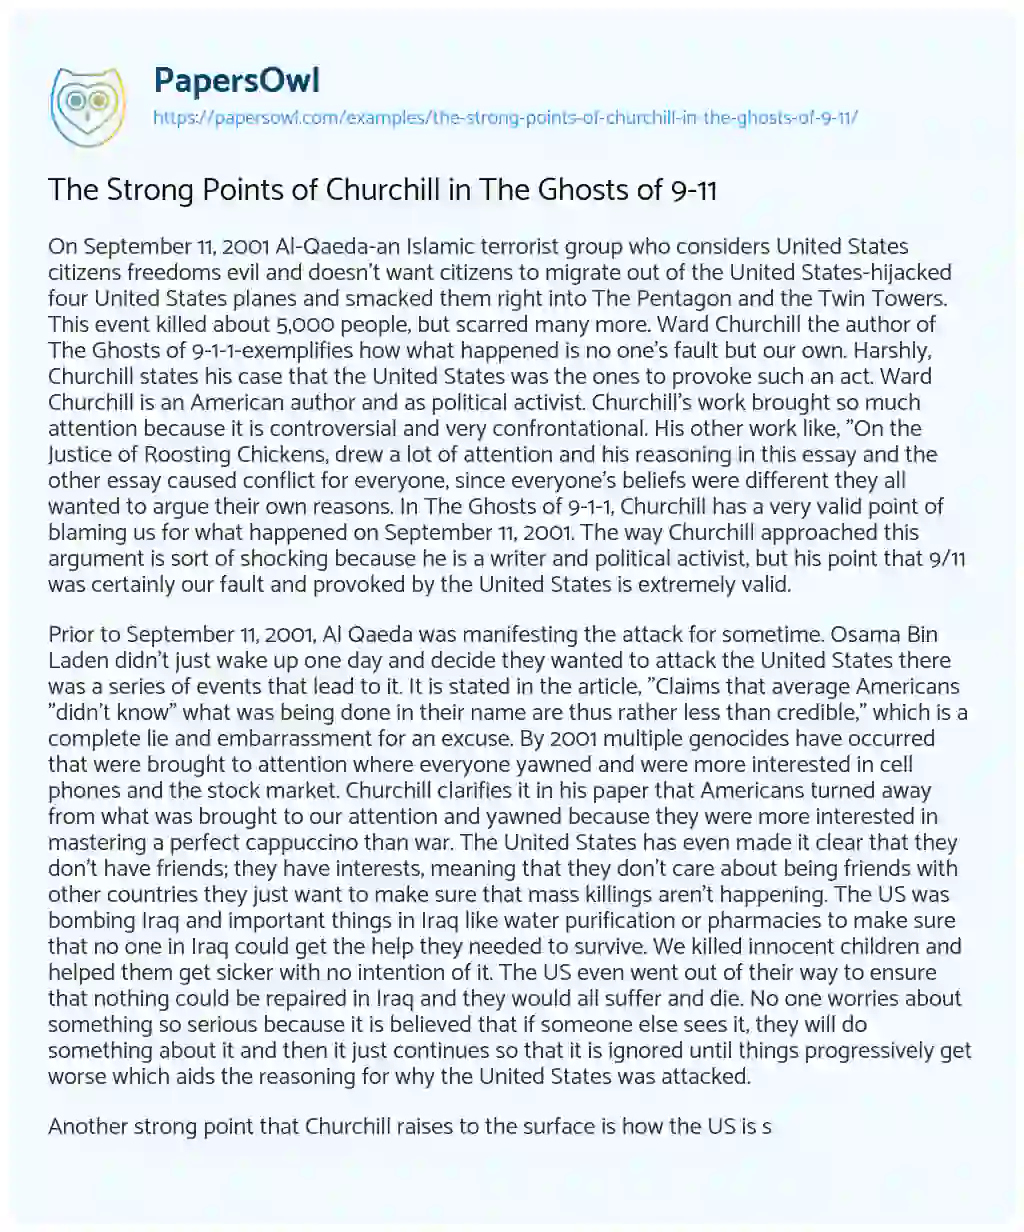 Essay on The Strong Points of Churchill in the Ghosts of 9-11